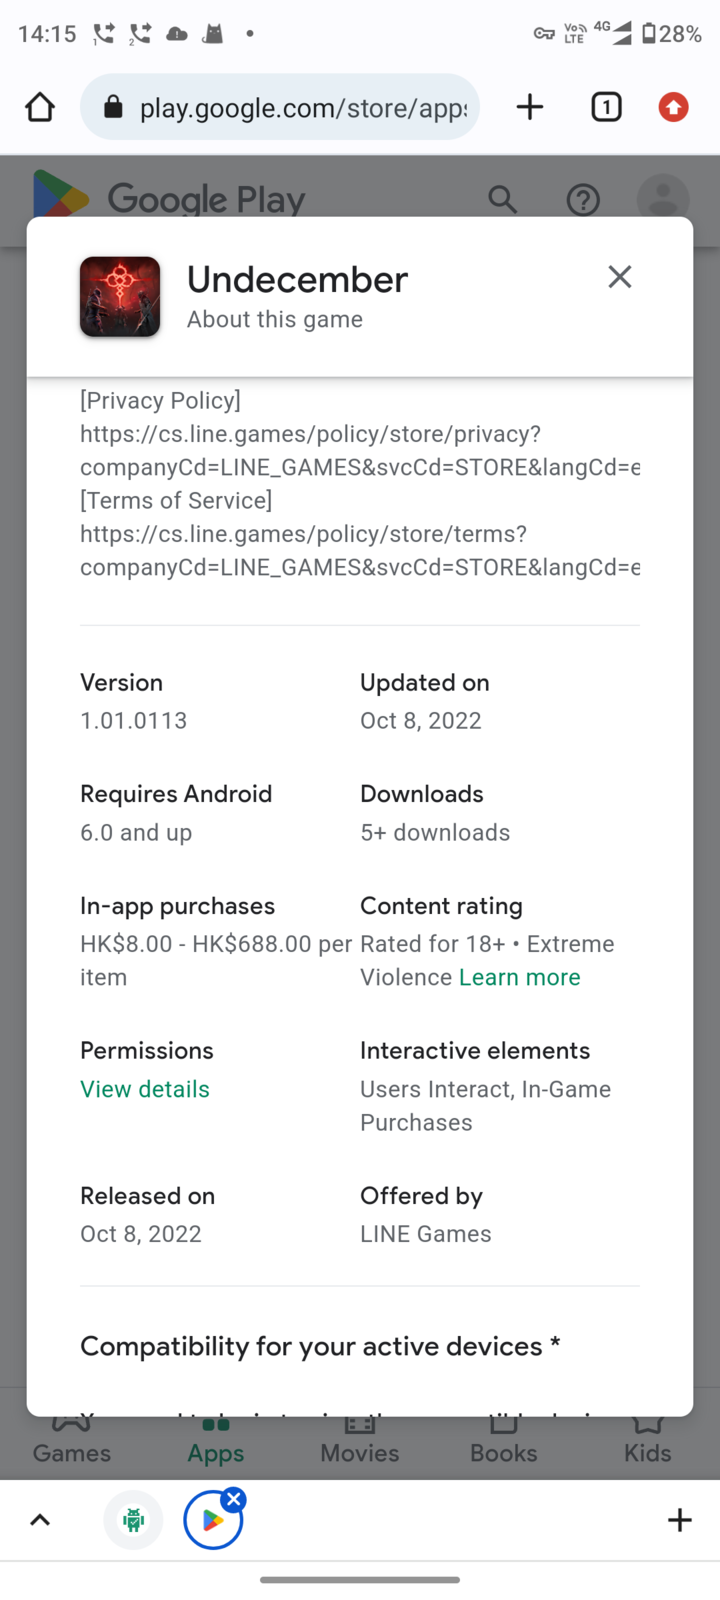 UNDECEMBER Download APK for Android (Free)